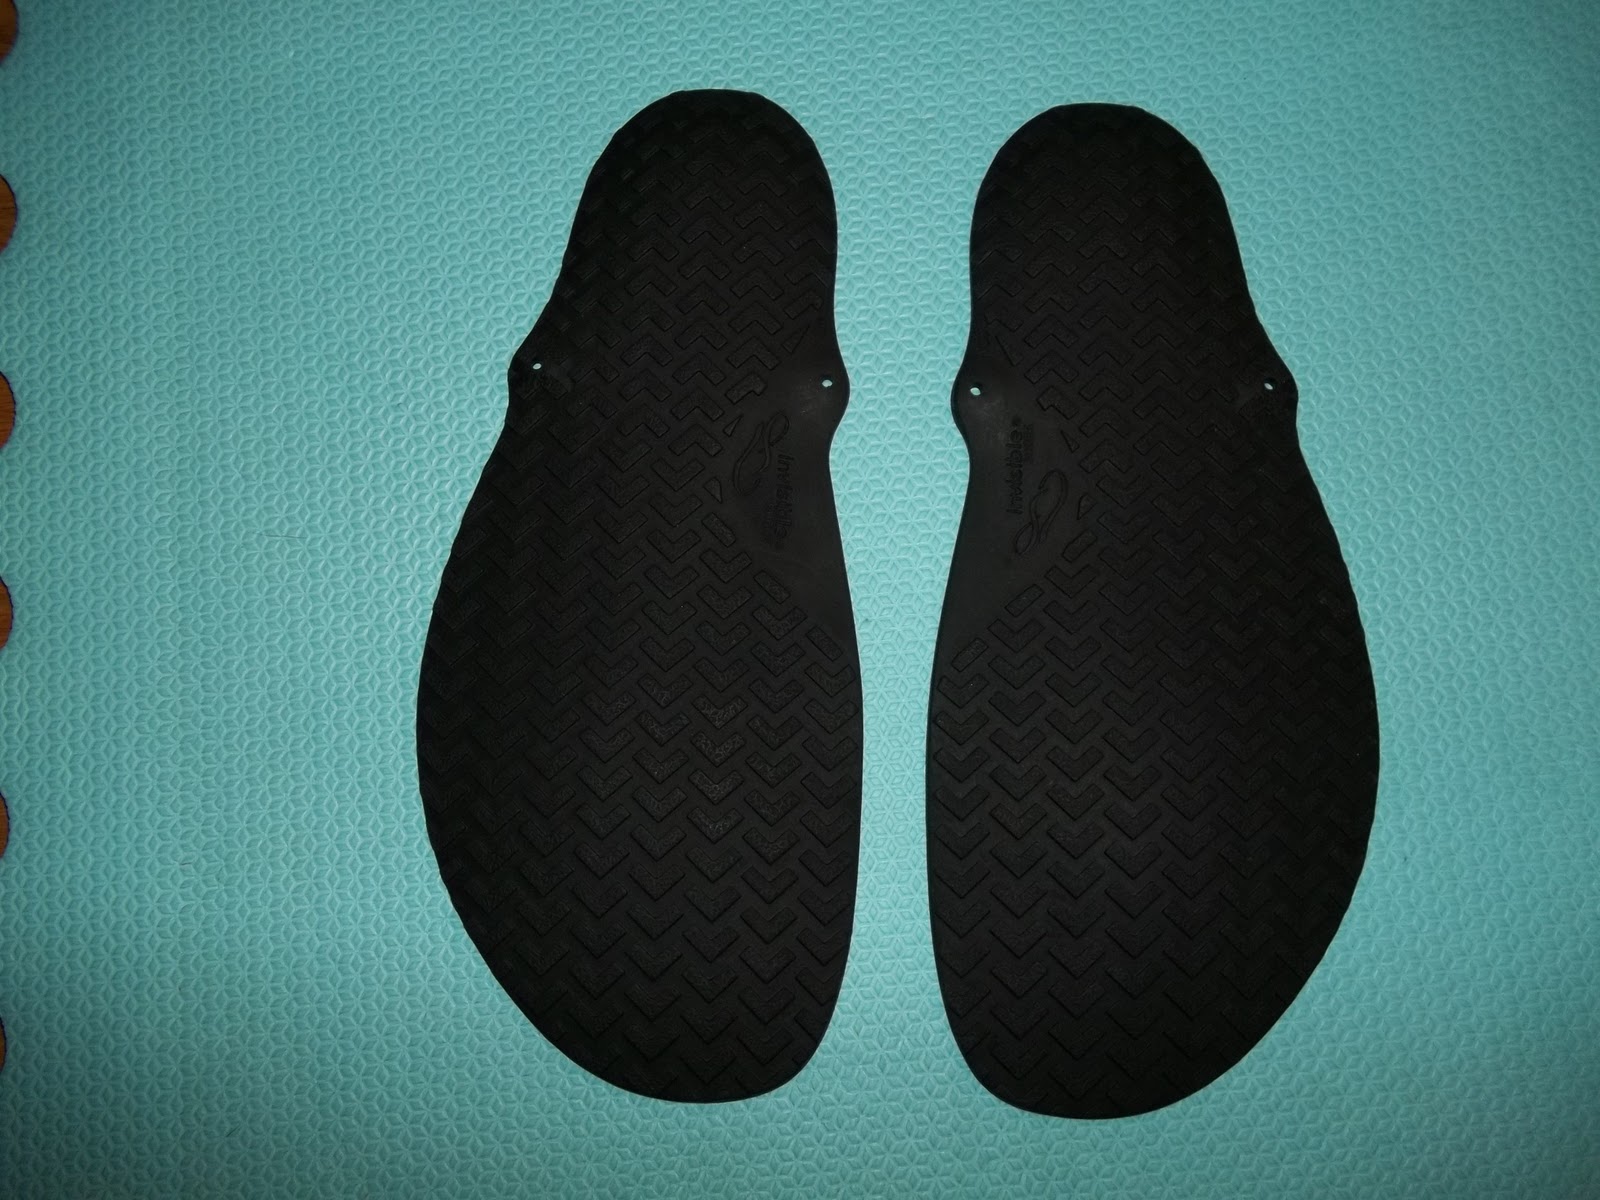 Barefoot Chiropractor: Invisible Shoes - 4mm Connect Huarache Review